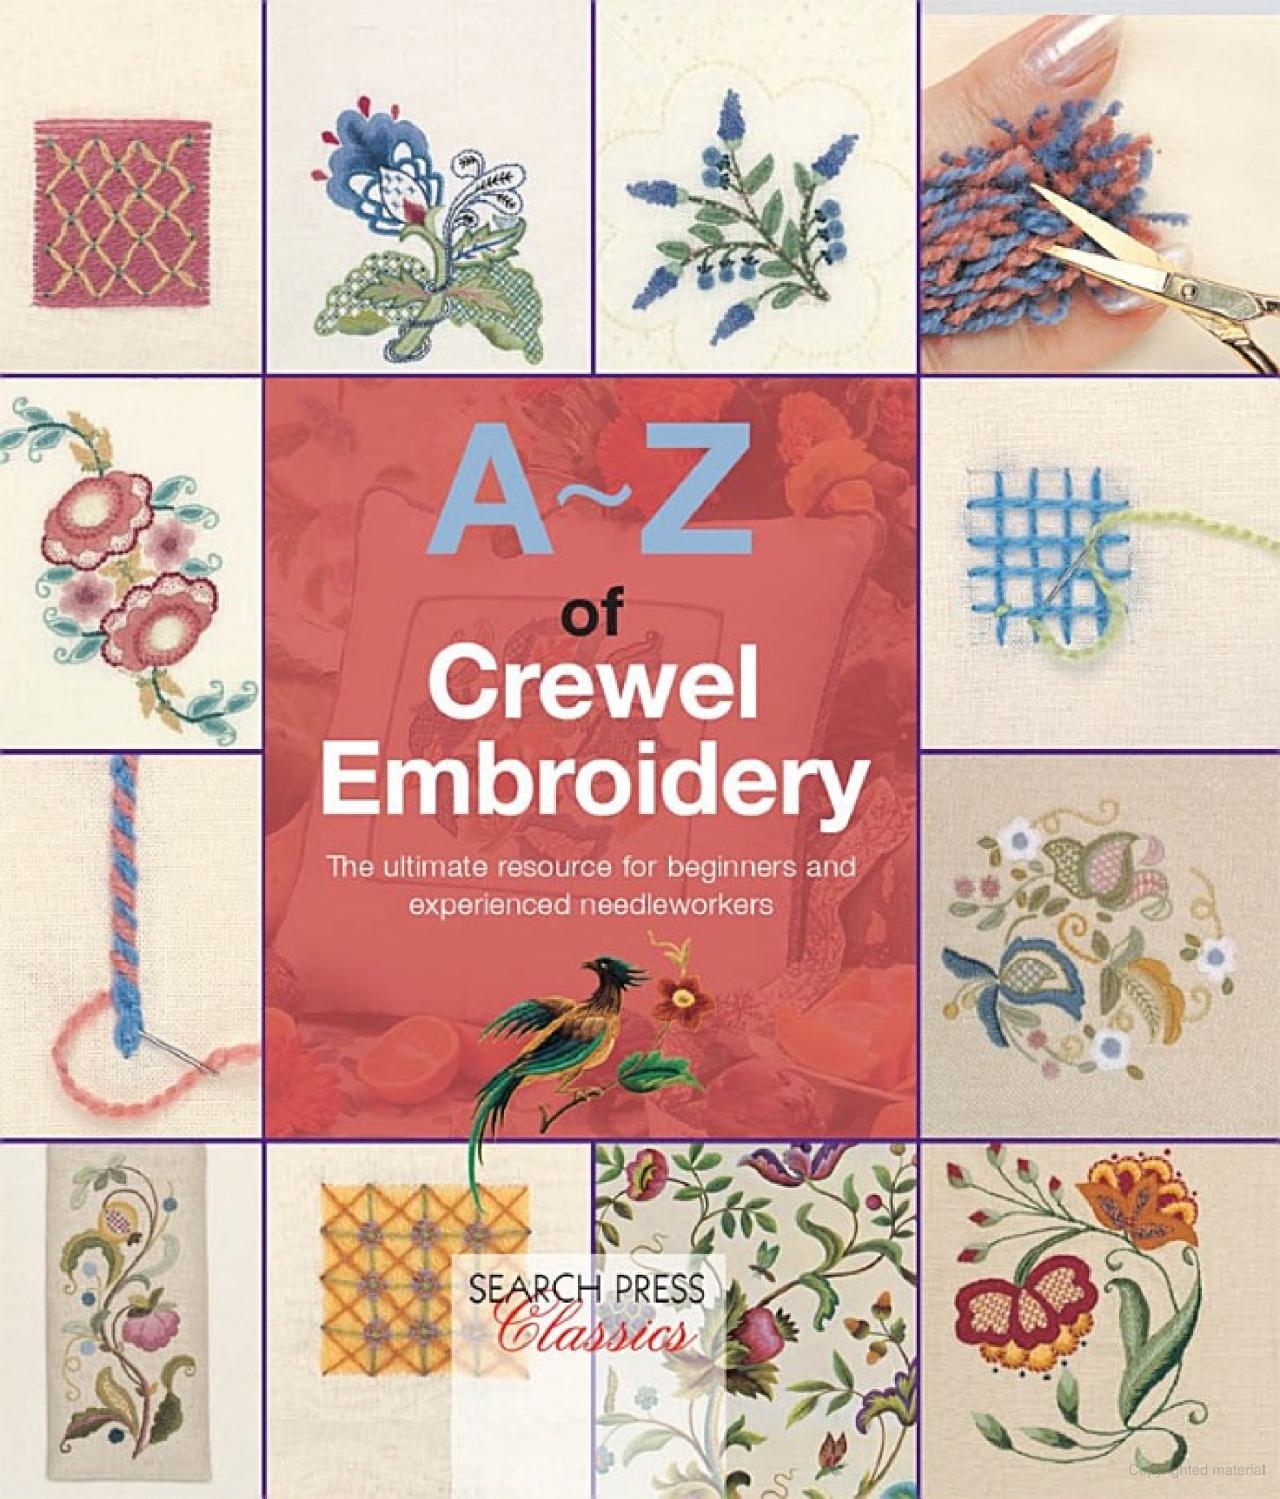 A-Z of Crewel Embroidery